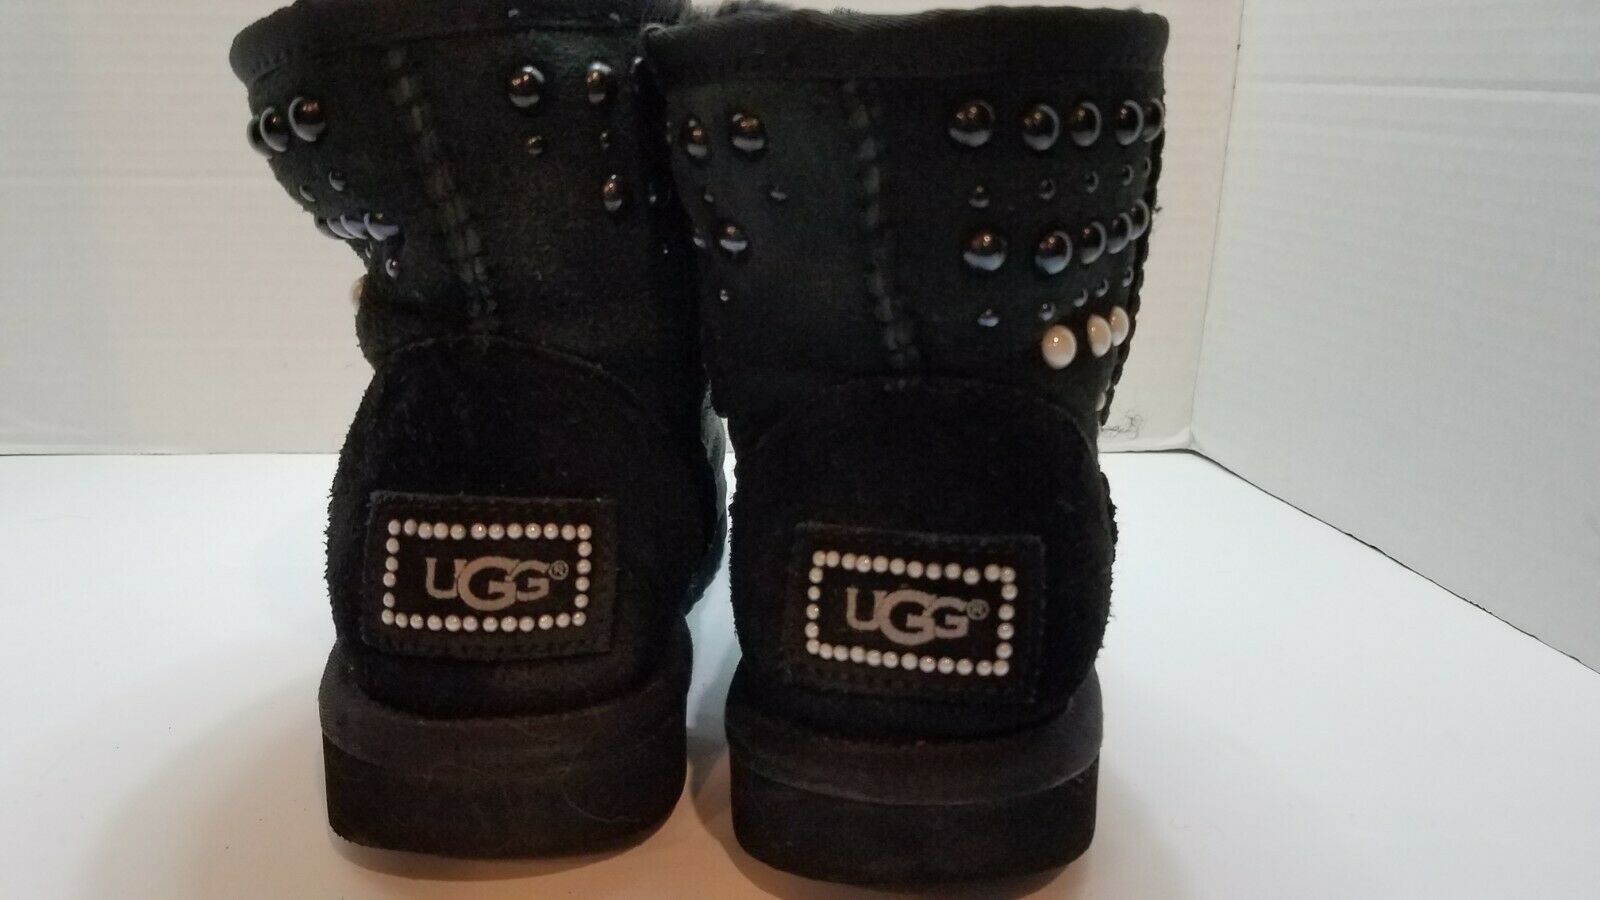 Ugg Boots Women/Kids Black with Pearls Sparkle Fur Snow Shoes size 4